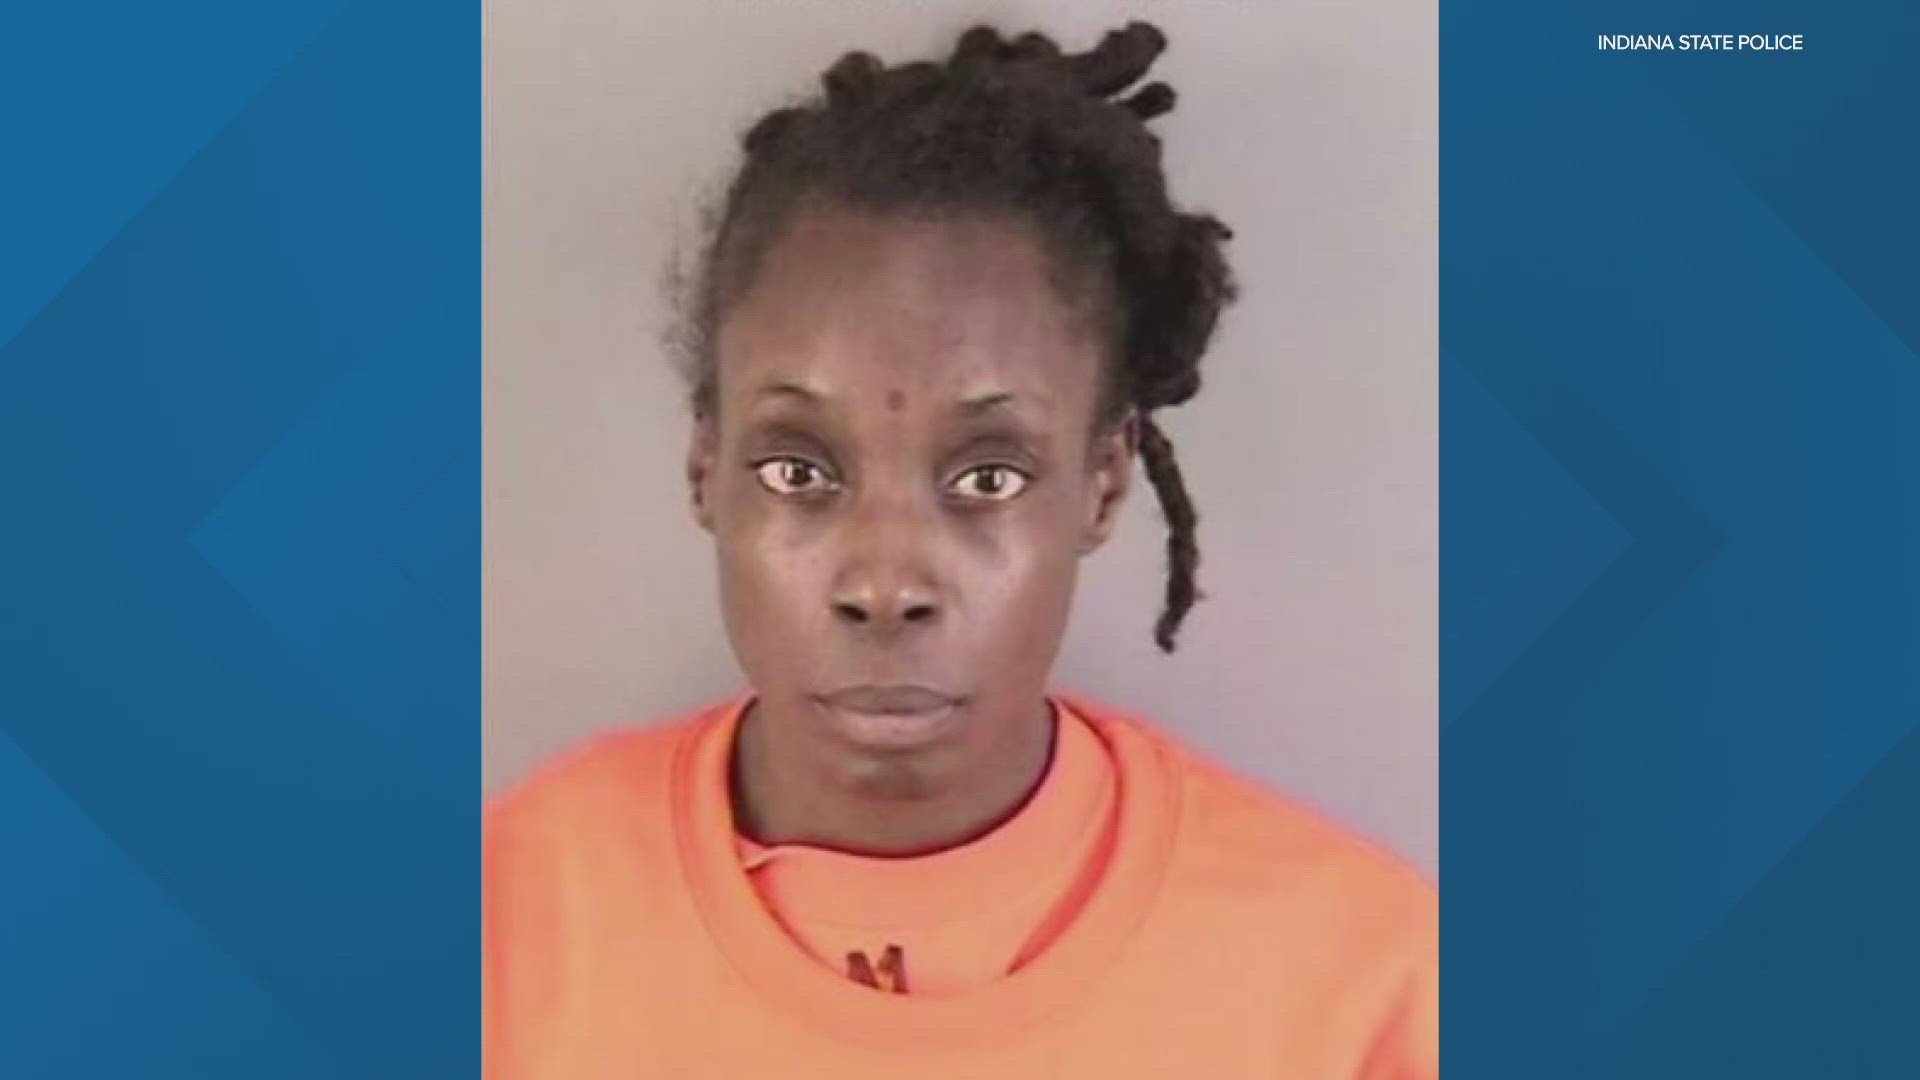 She's accused of helping 37-year-old dispose of the body of her 5-year-old son last April.